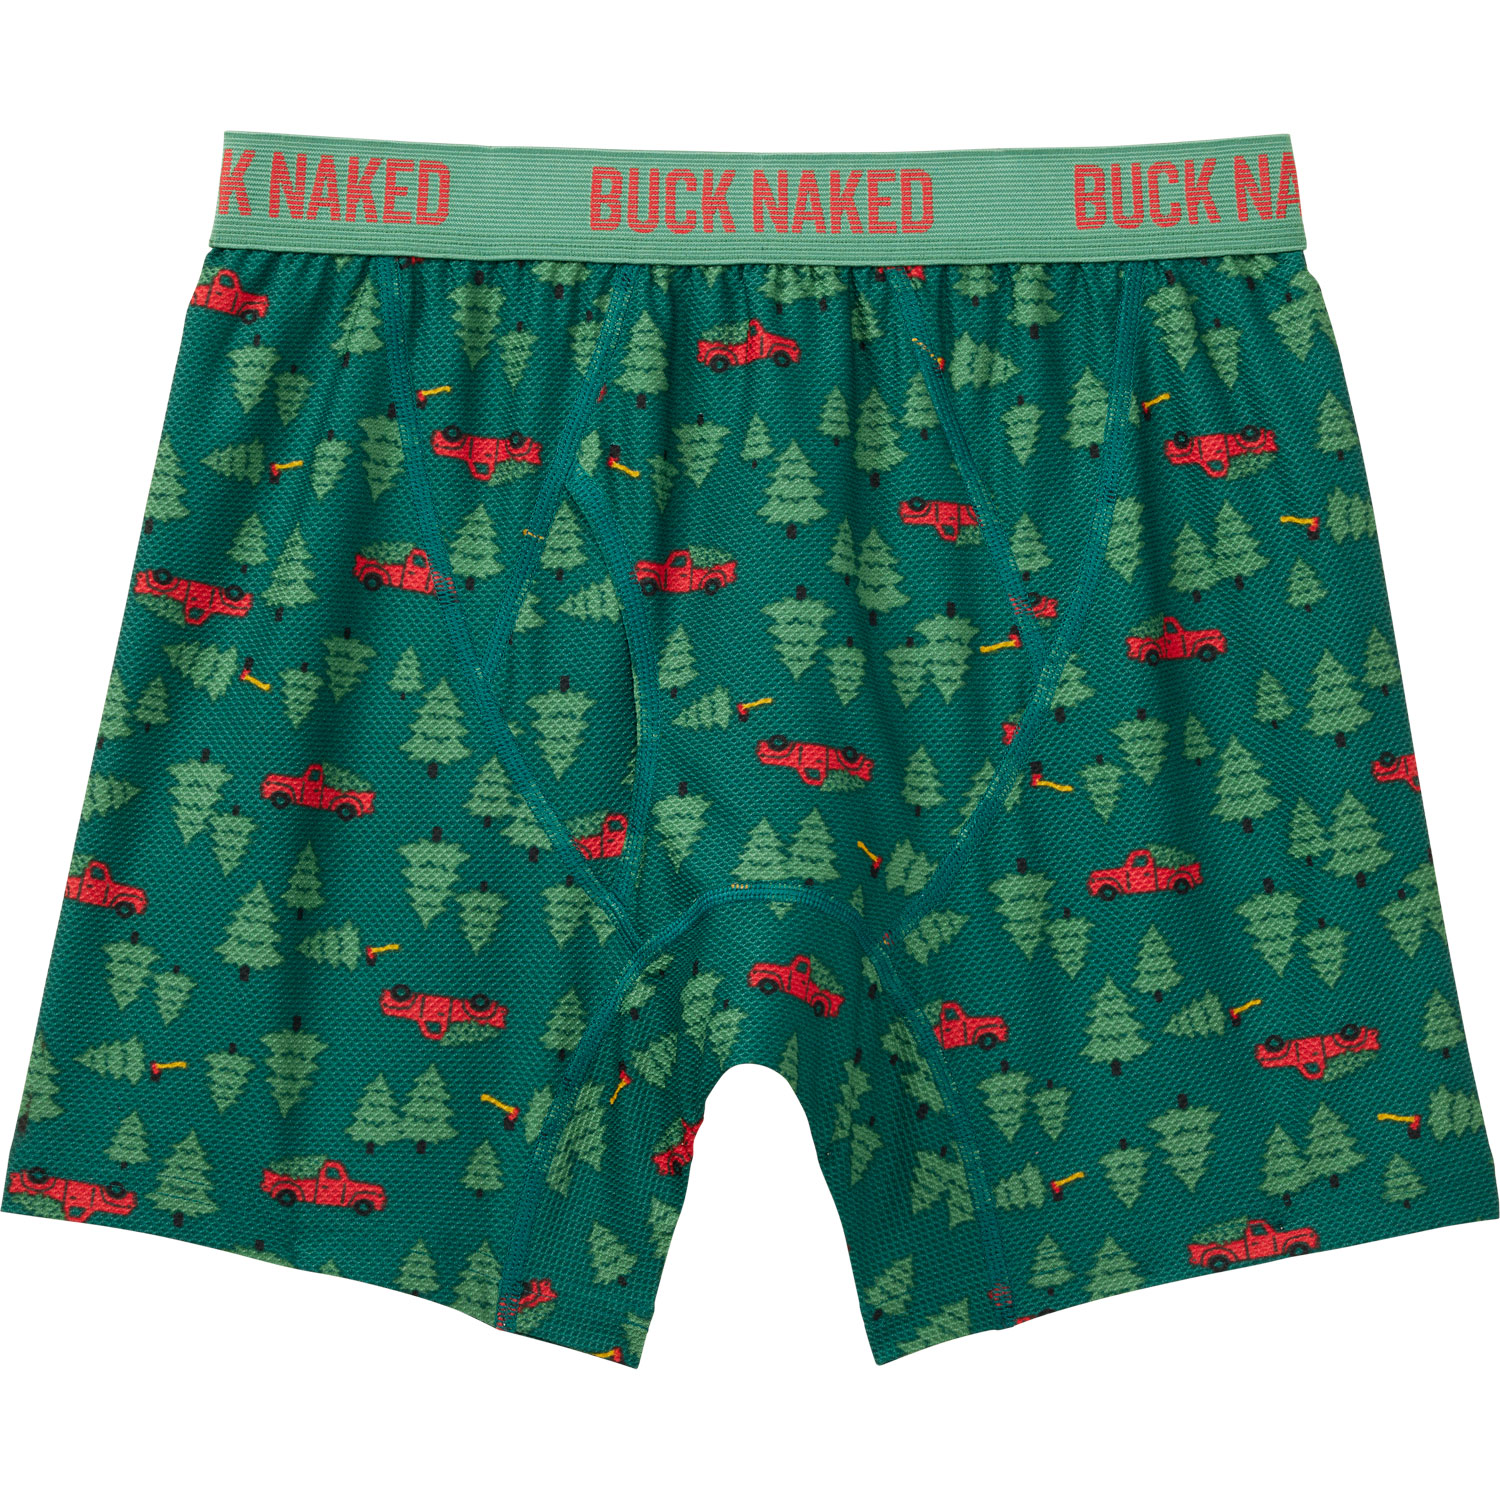 Duluth Trading Co, Underwear & Socks, Duluth Trading Co Go Buck Naked  Bacon Eggs Moisture Wicking Boxer Briefs Sz L